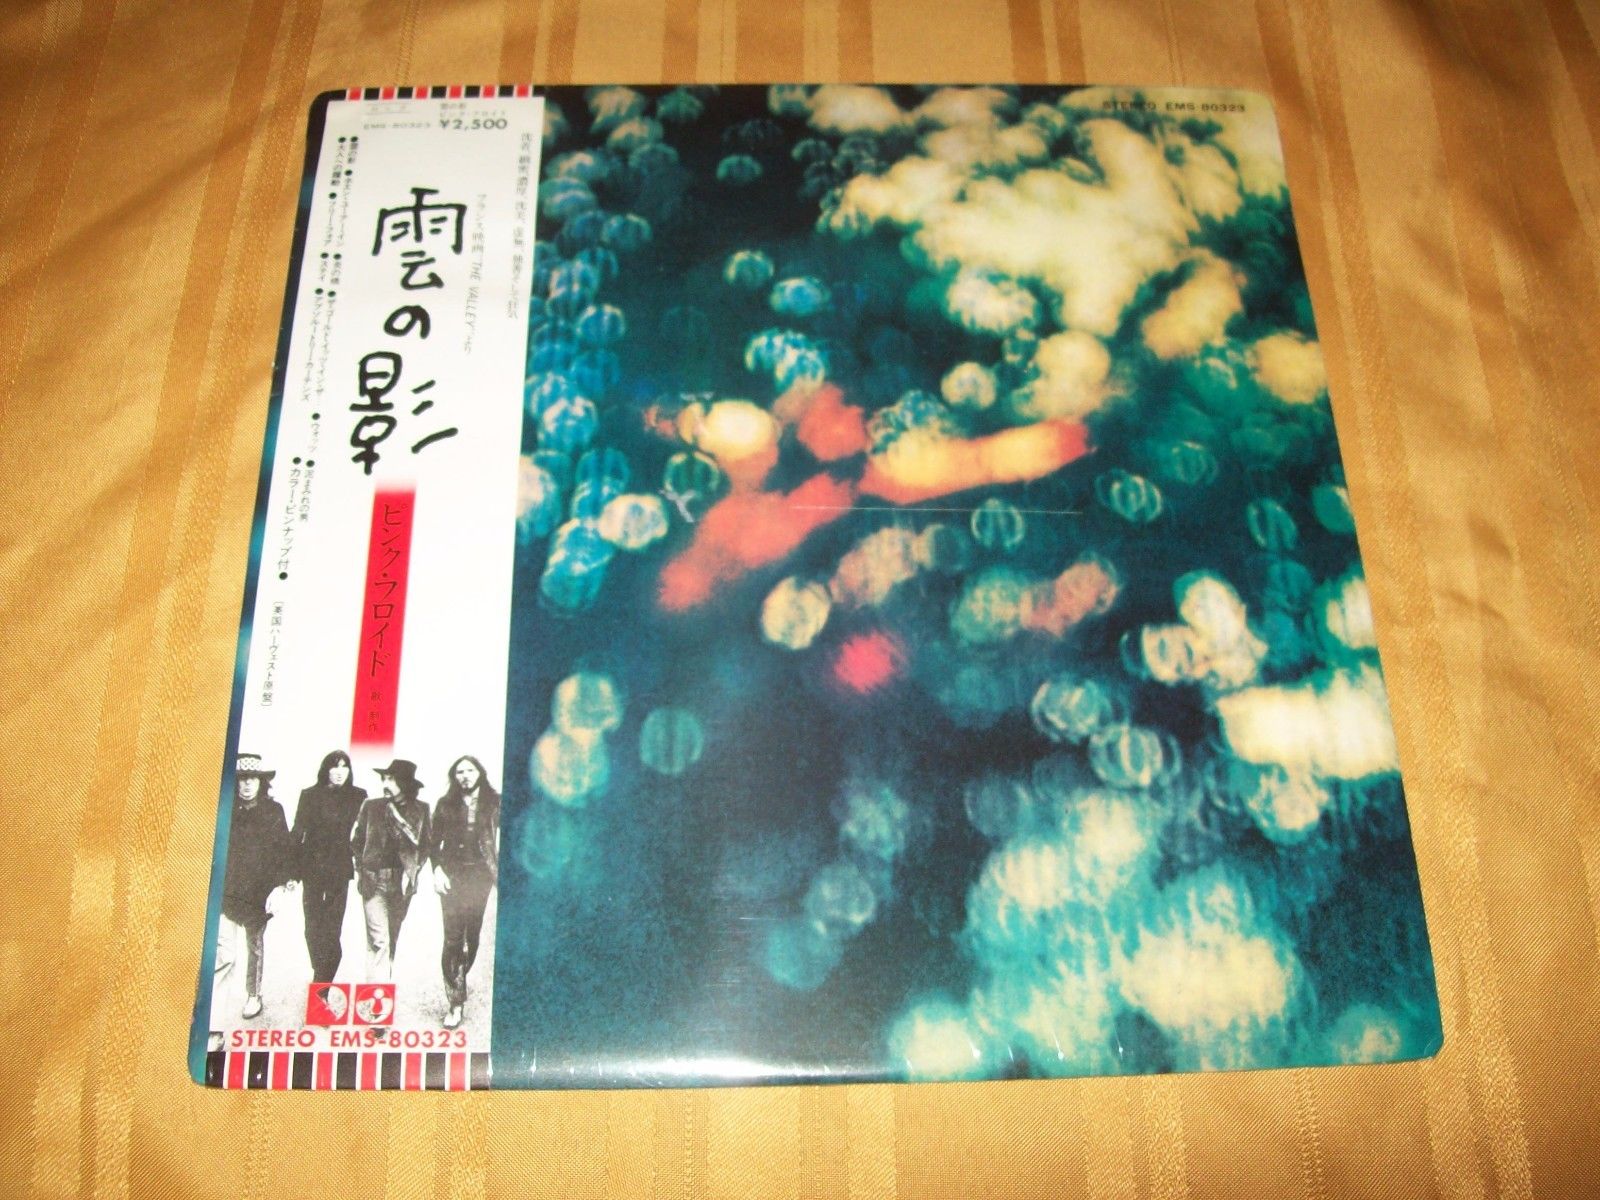  Rare SEALED Pink Floyd Obscured By Clouds LP Japan 1st  Pressing Record OBI - auction details